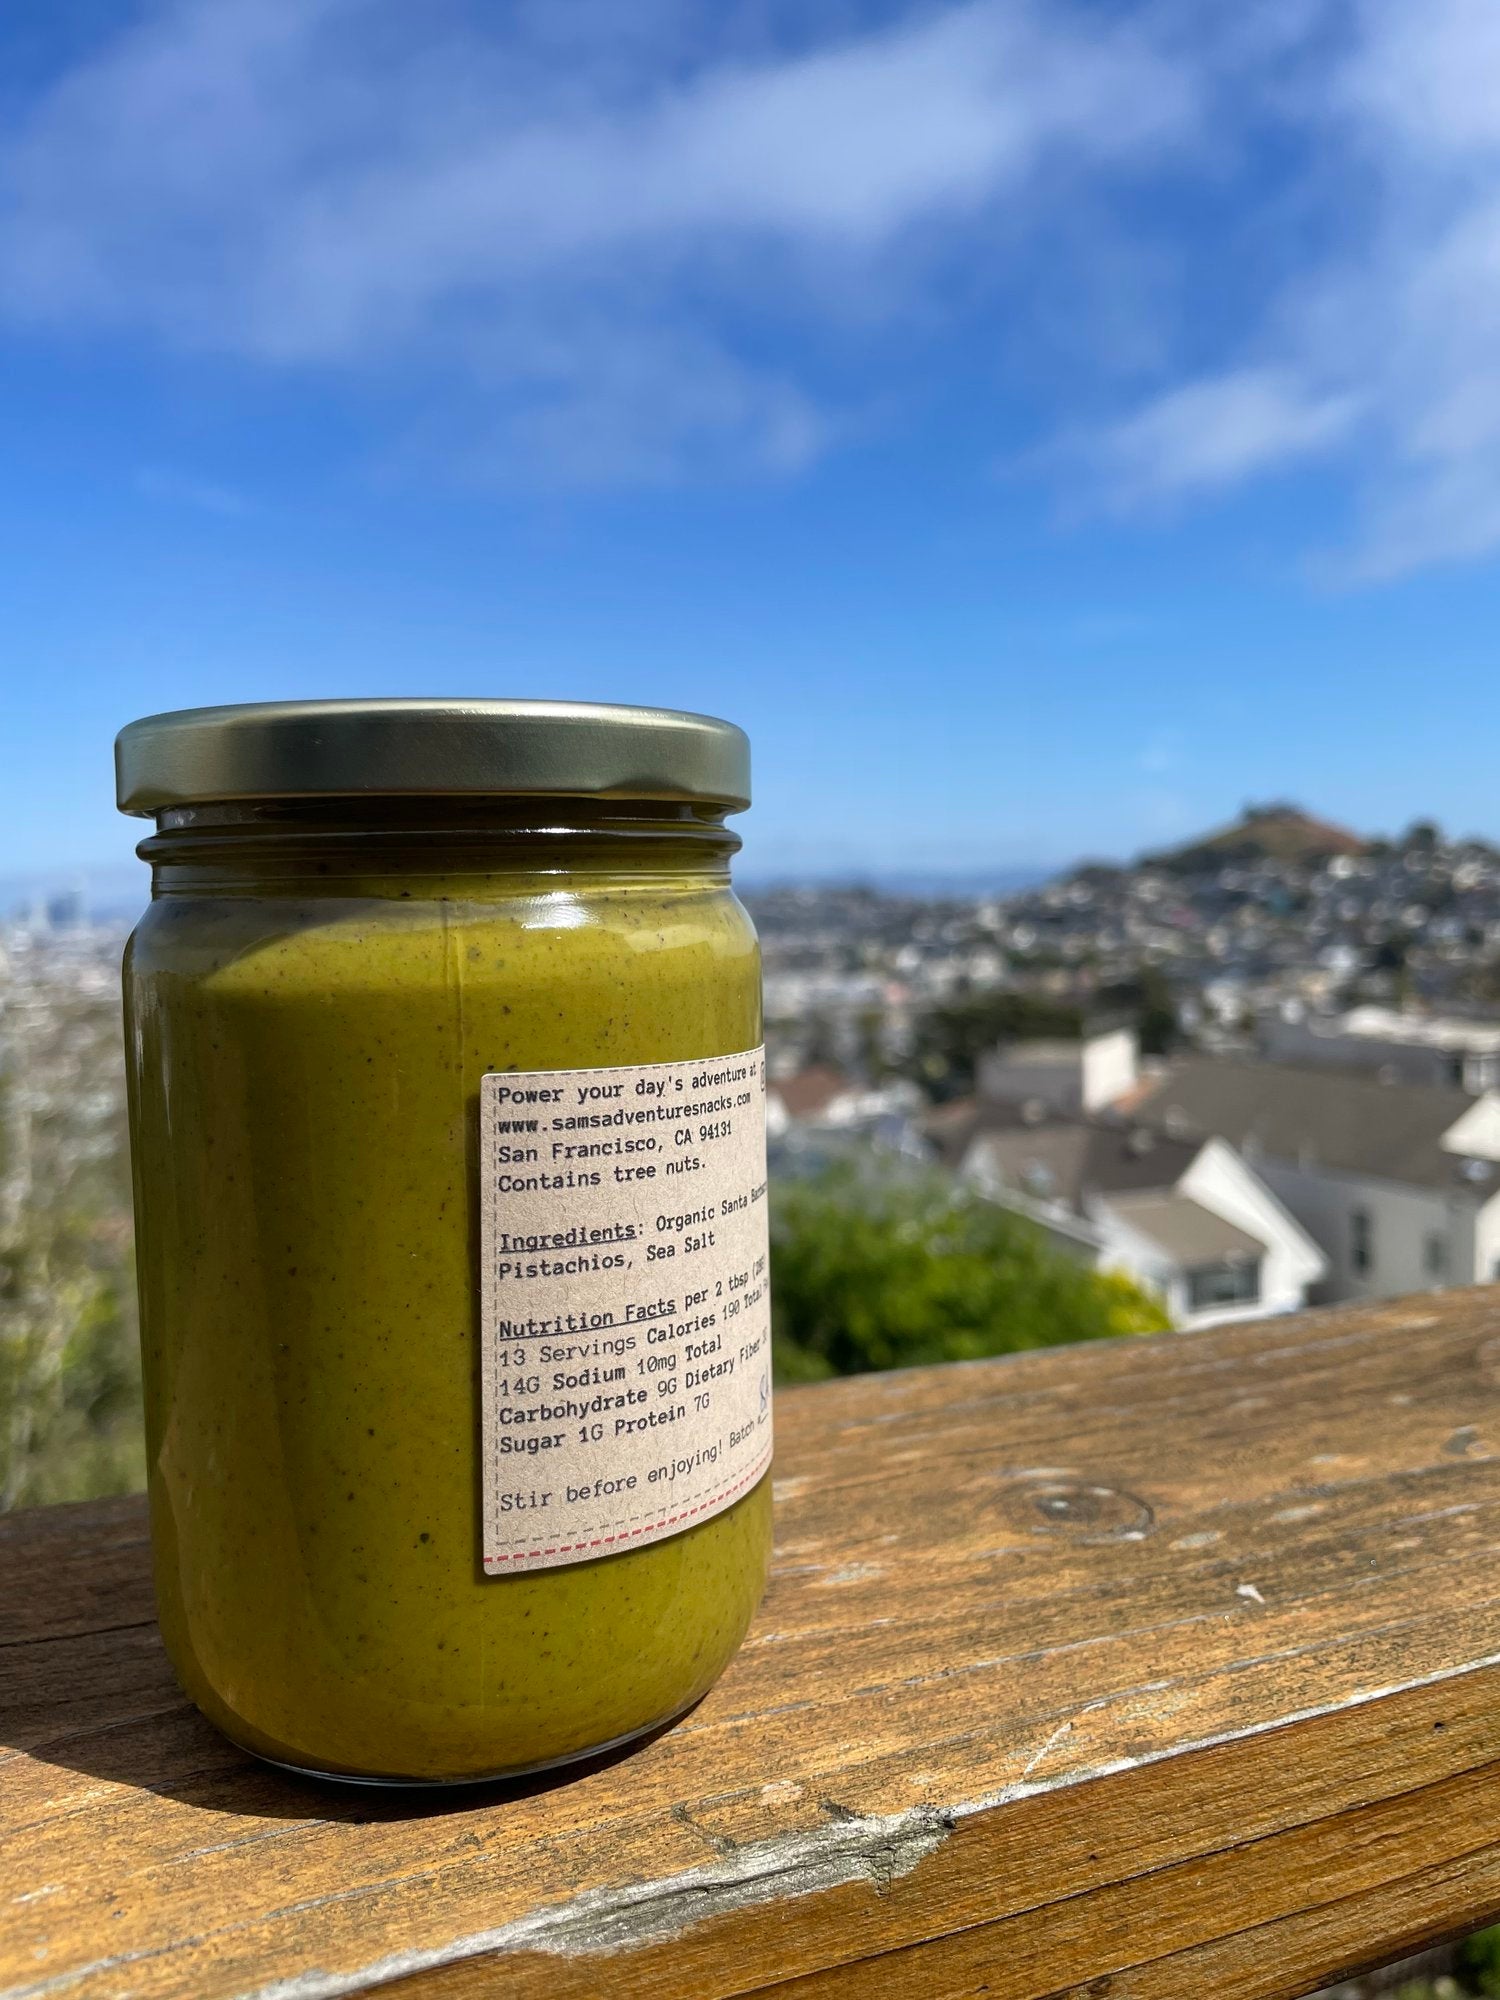 13 oz jar of organic santa barbara pistachio spread. Jar is placed on a wood bench with the city of San Francisco in the background. Jar is turned around to show back label with product description and ingredients.